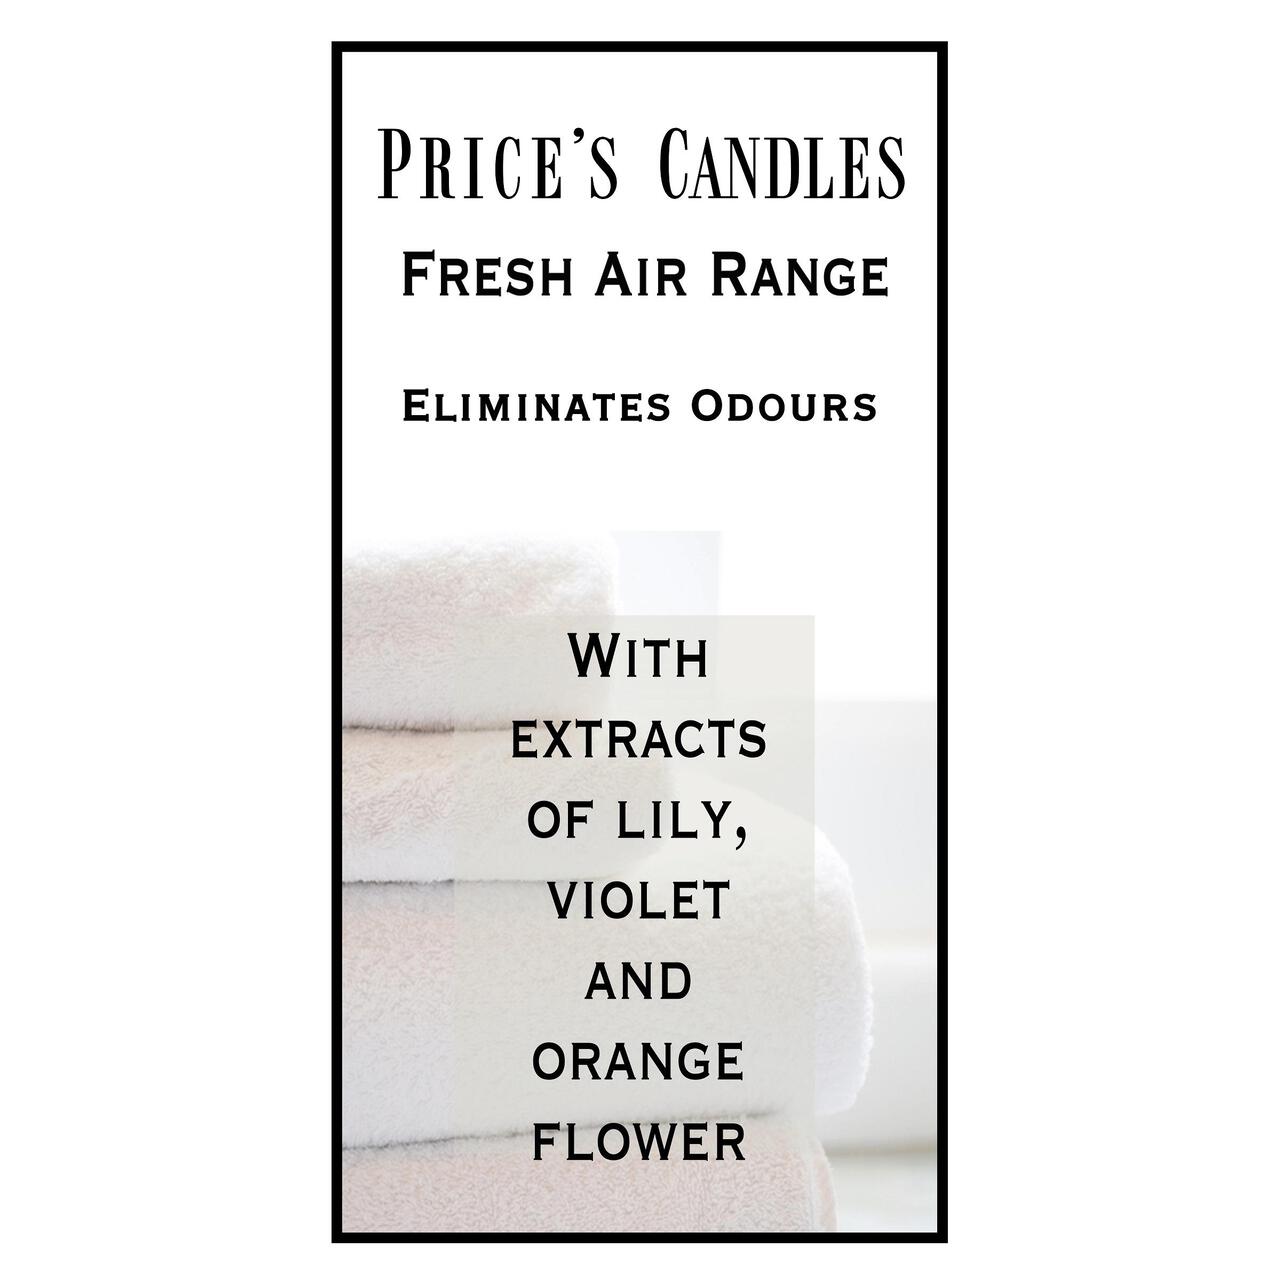 Price's Candles Open Window Odour Eliminating Jar